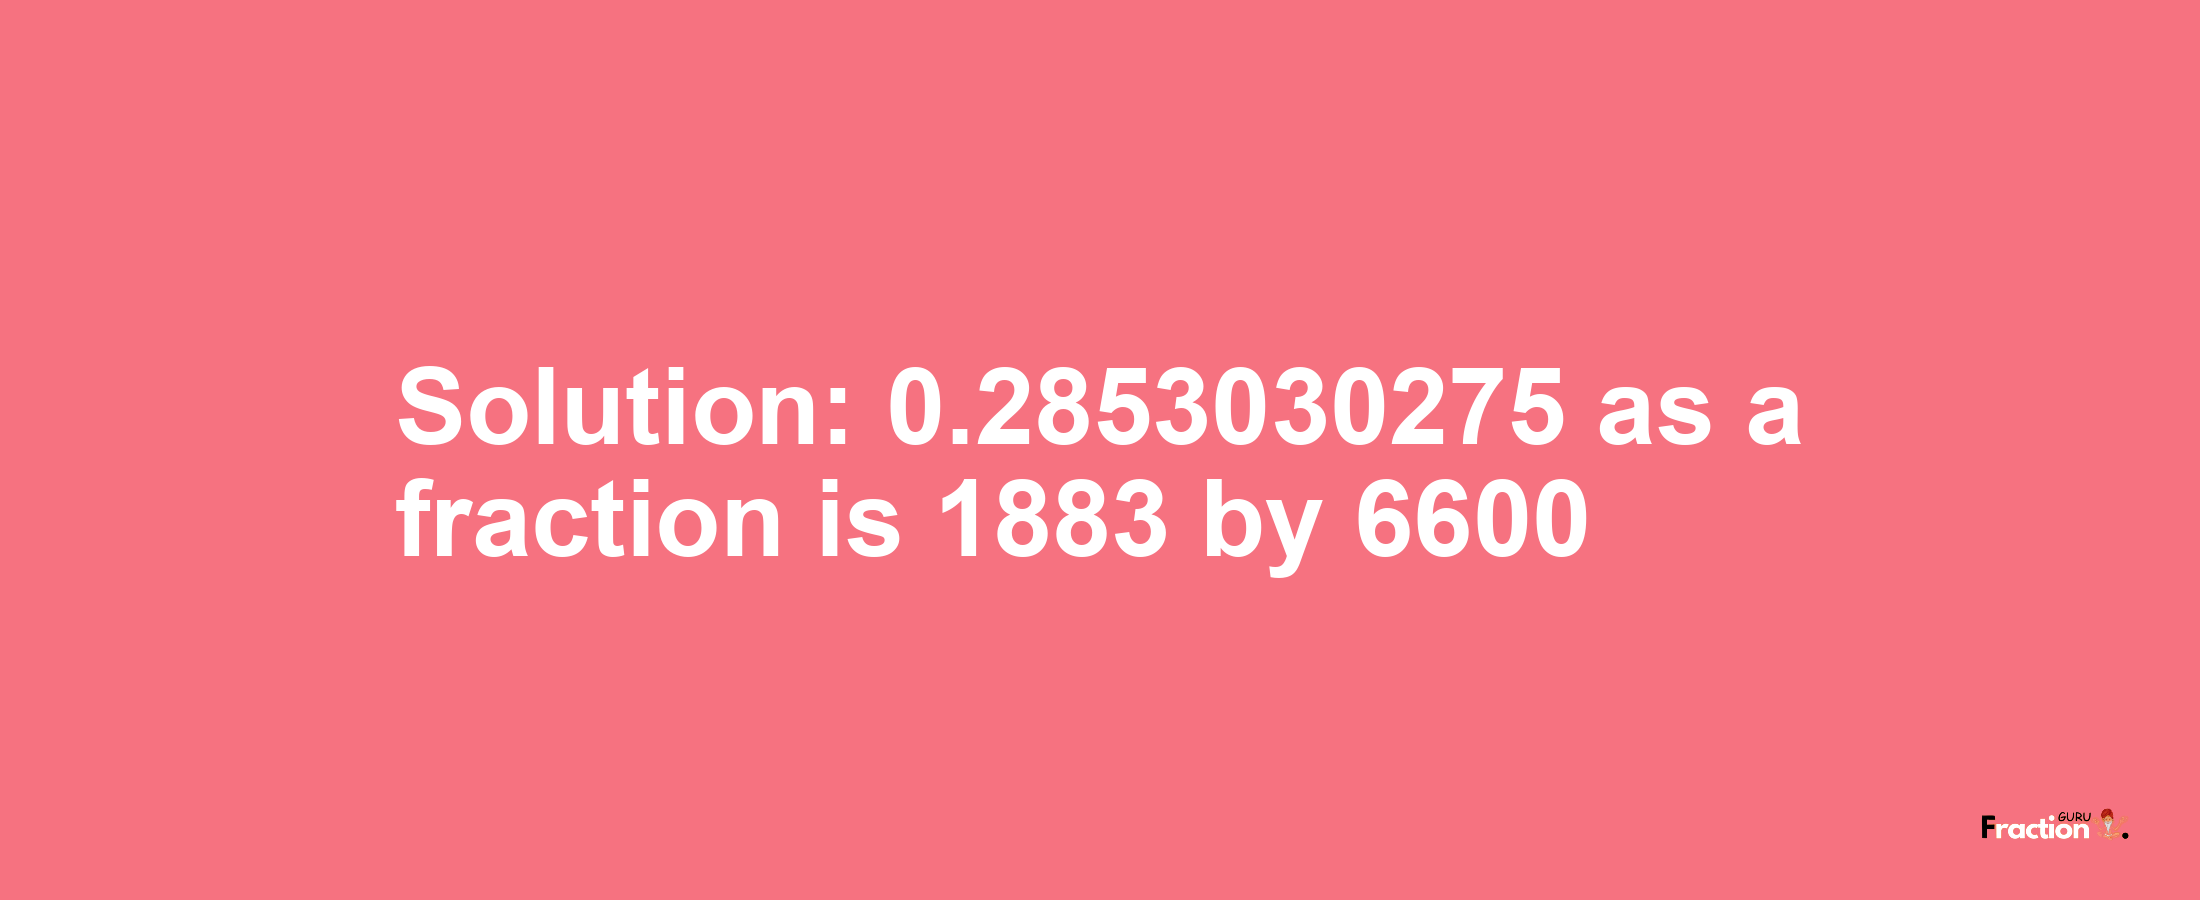 Solution:0.2853030275 as a fraction is 1883/6600